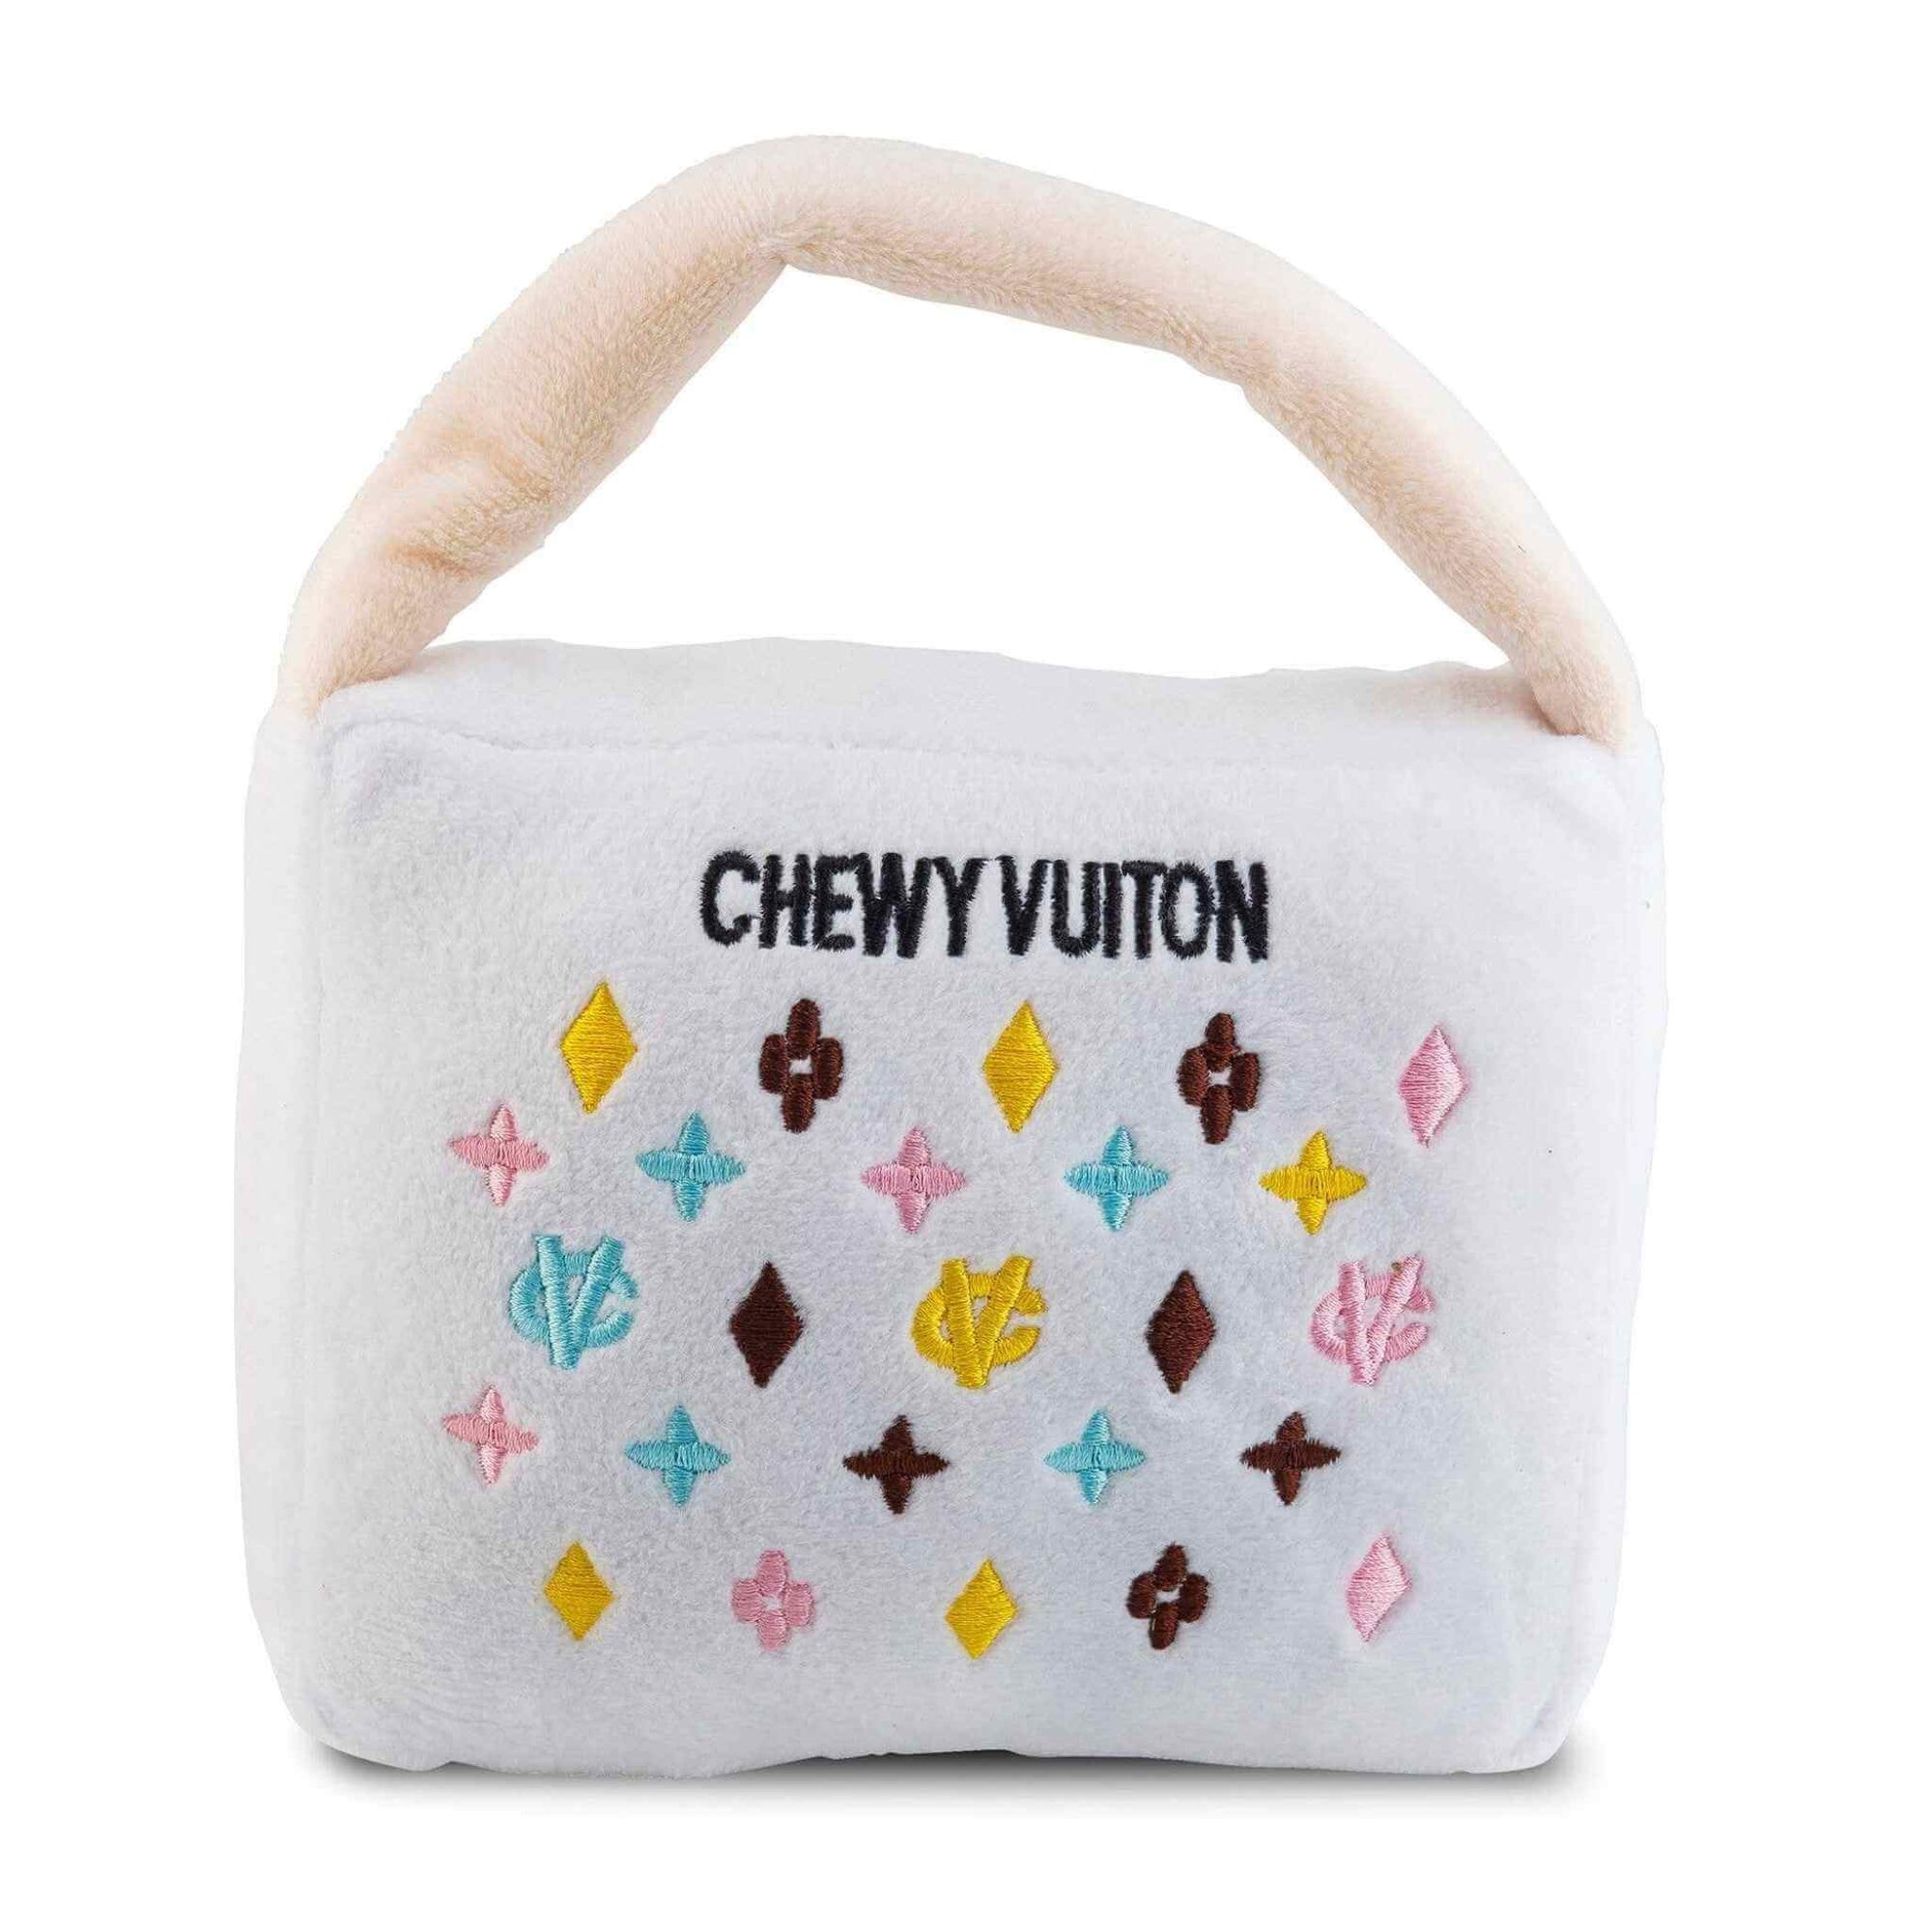 Chewy Vuiton Purse Plush Dog Toy - Front